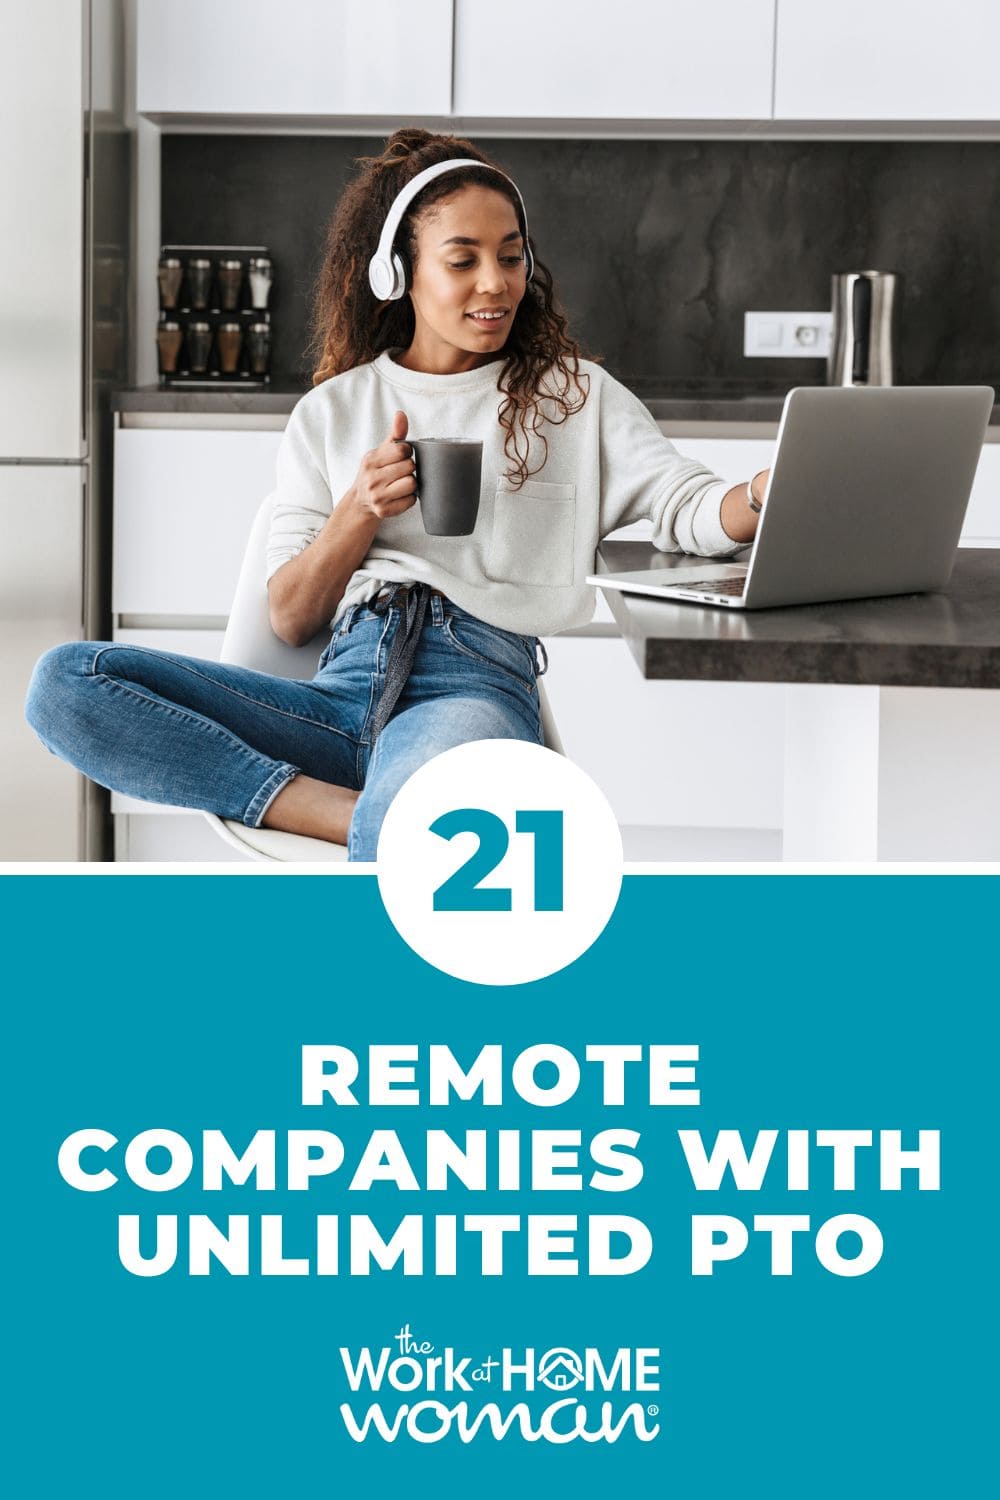 Are you looking for a work from home job that provides awesome benefits? Here is a list of companies with unlimited PTO!